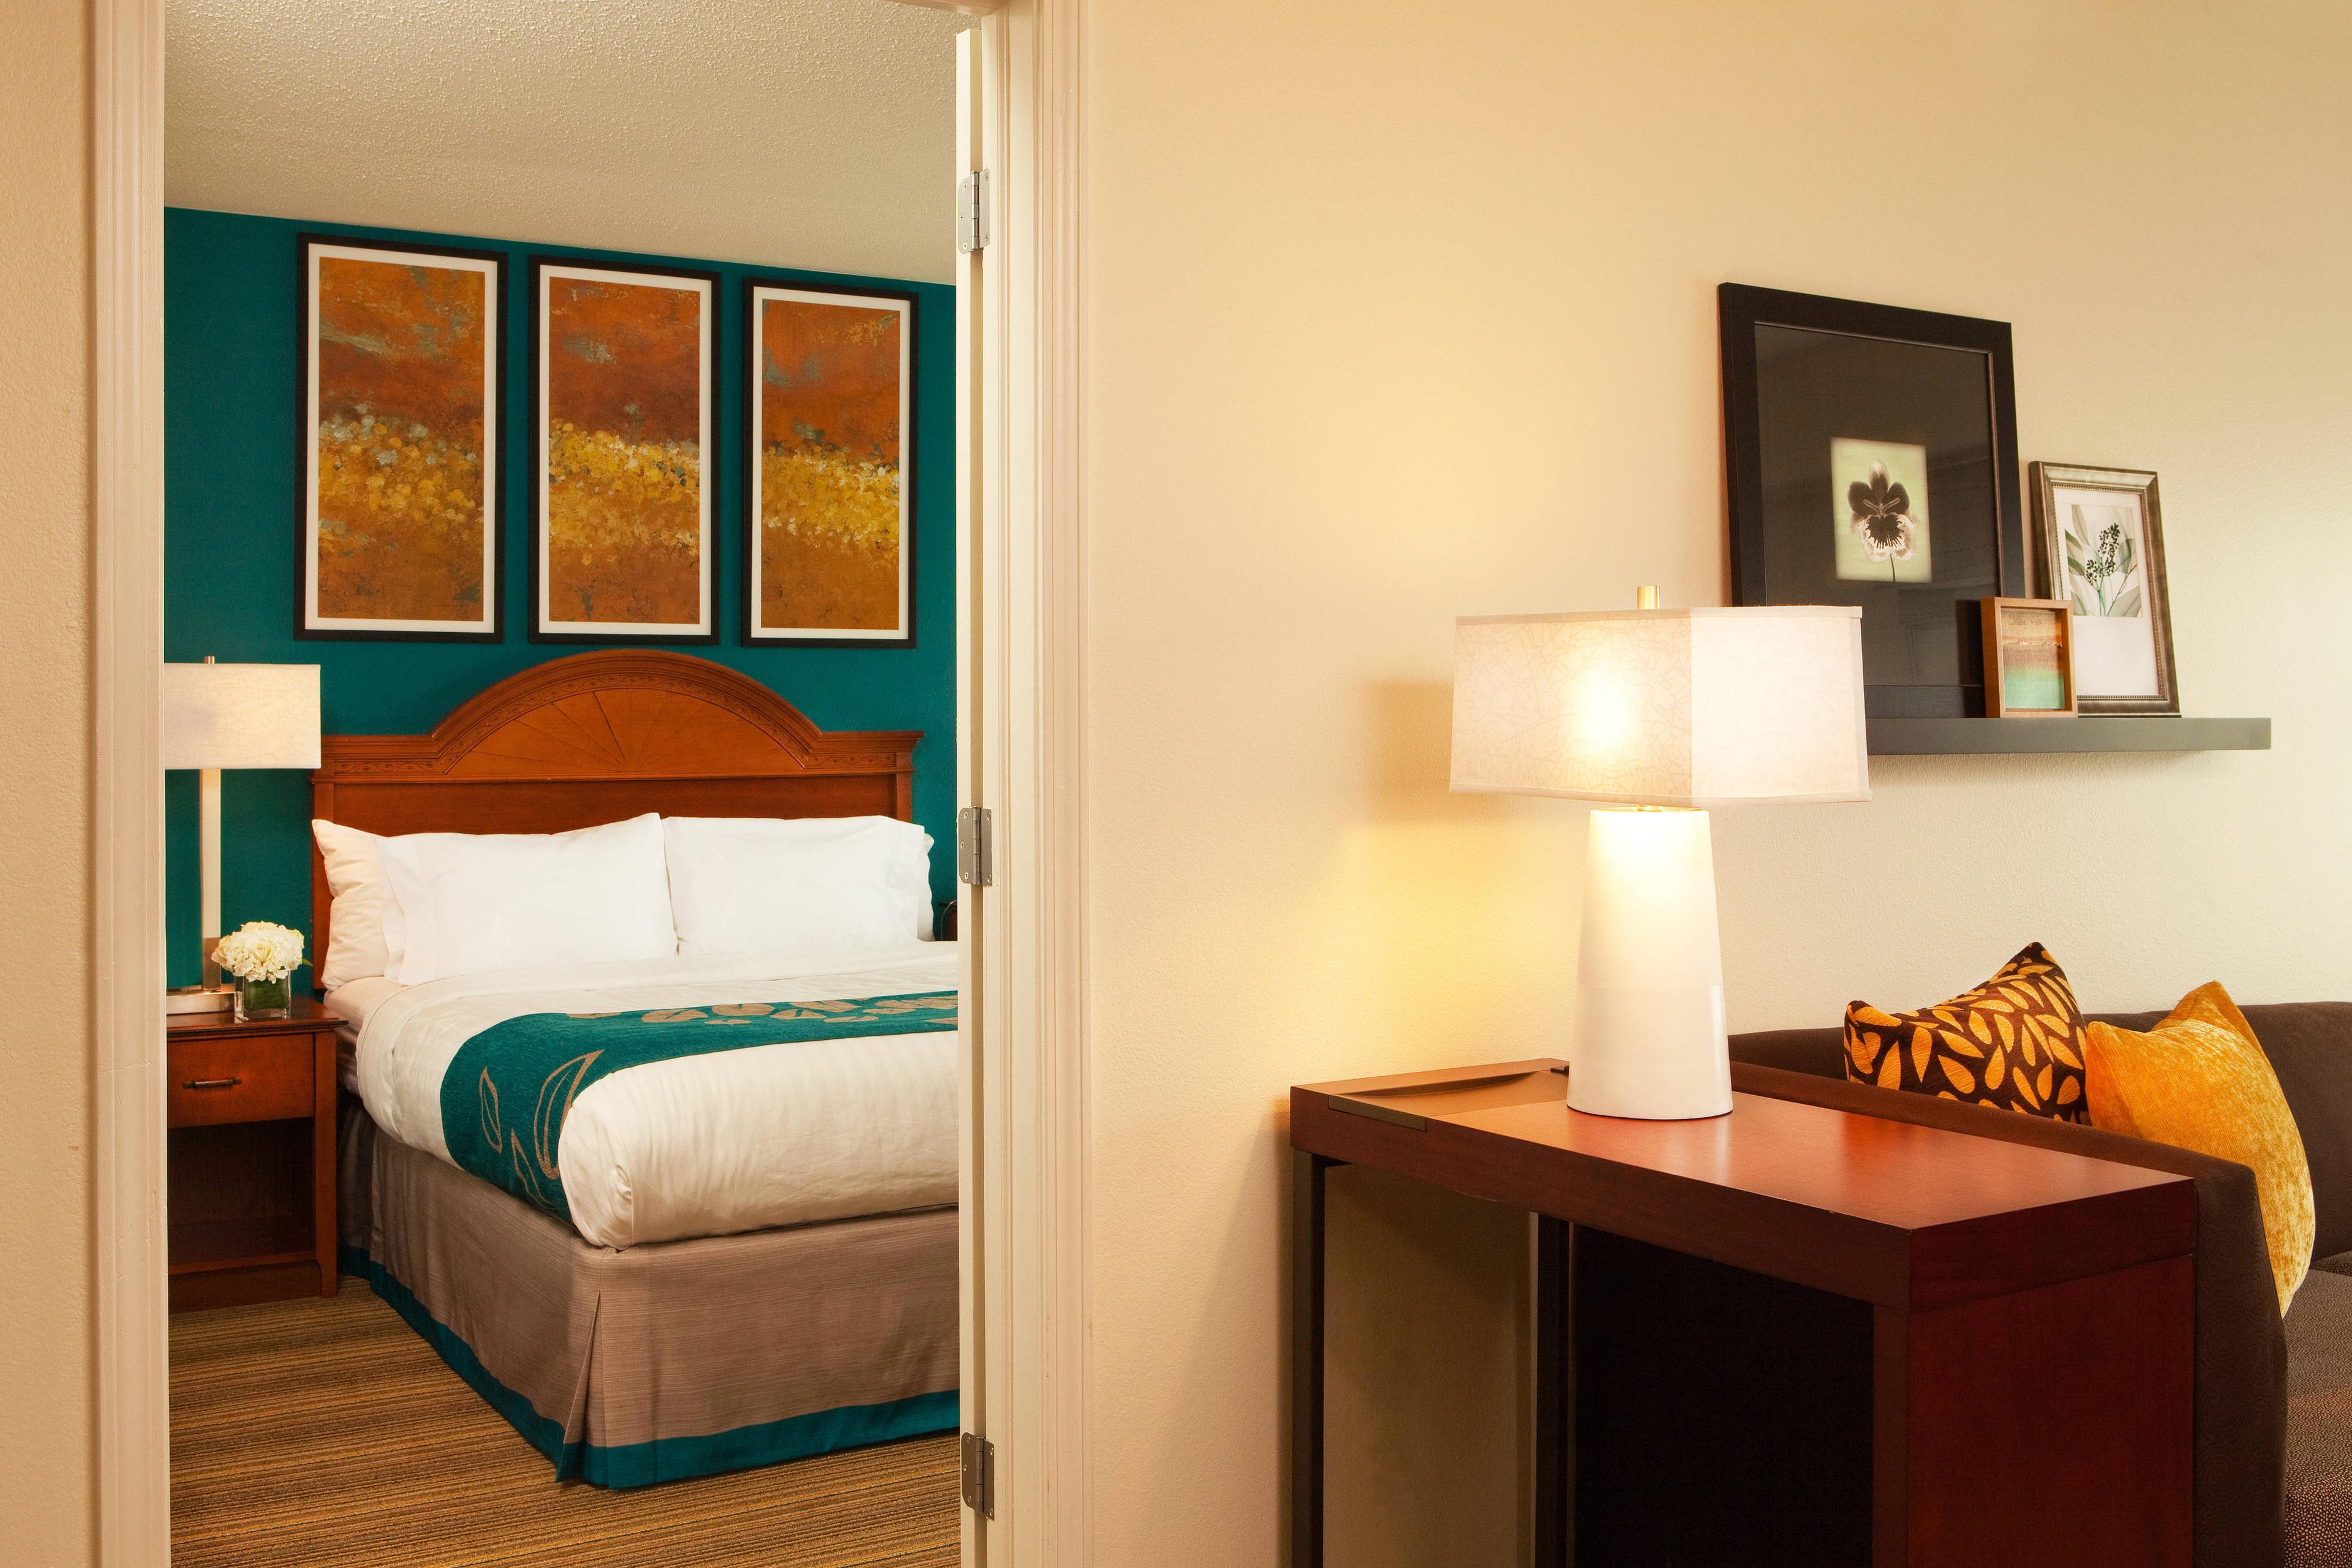 Relax in our newly renovated guest rooms at the Residence Inn Greenbelt.